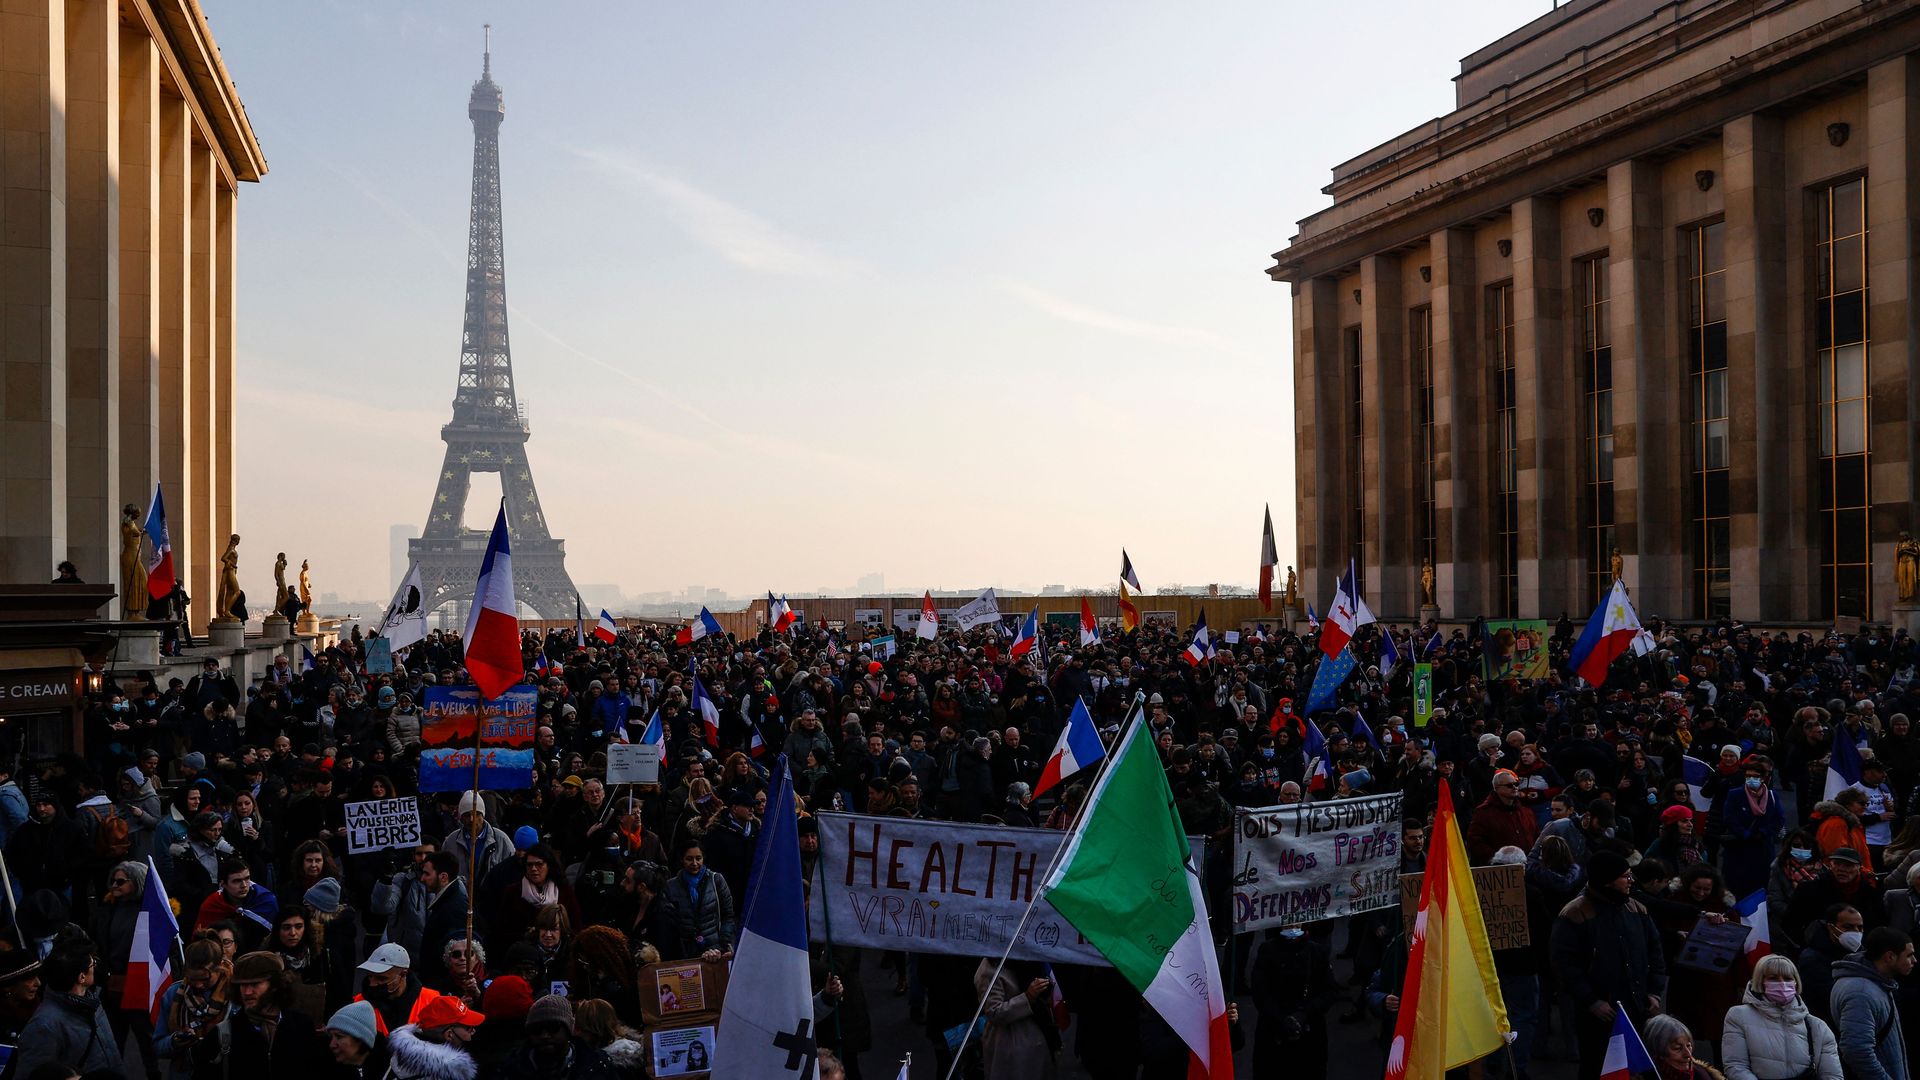    Protesters gather to demonstrate against the health pass and Covid-19 vaccines, on Trocadero plaza in Paris, on January 15.